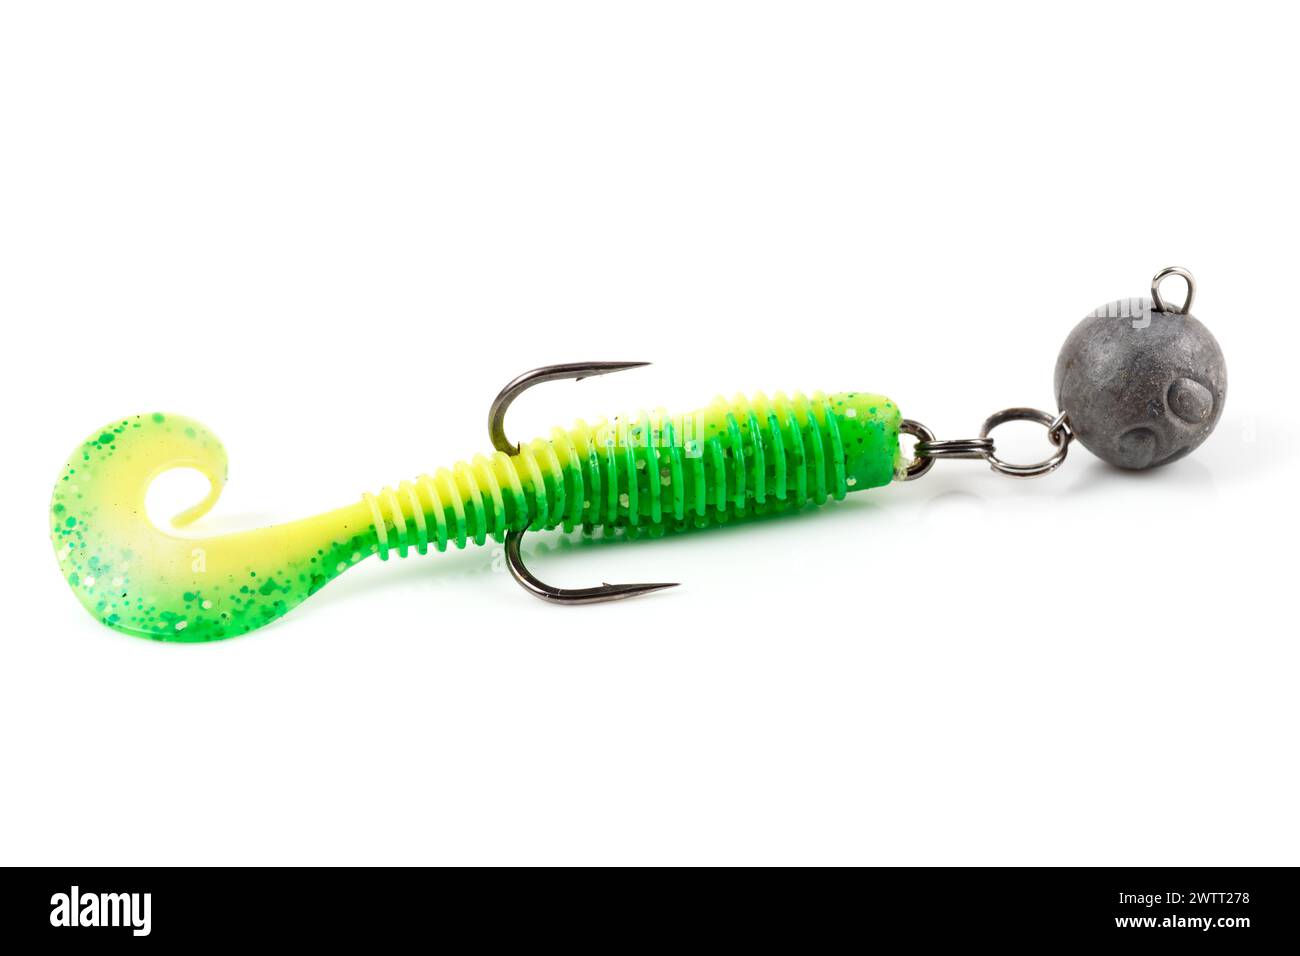 Soft fishing bait for predatory fish, green plastic grub, with double hook and lead sinker, isolated on background Stock Photo